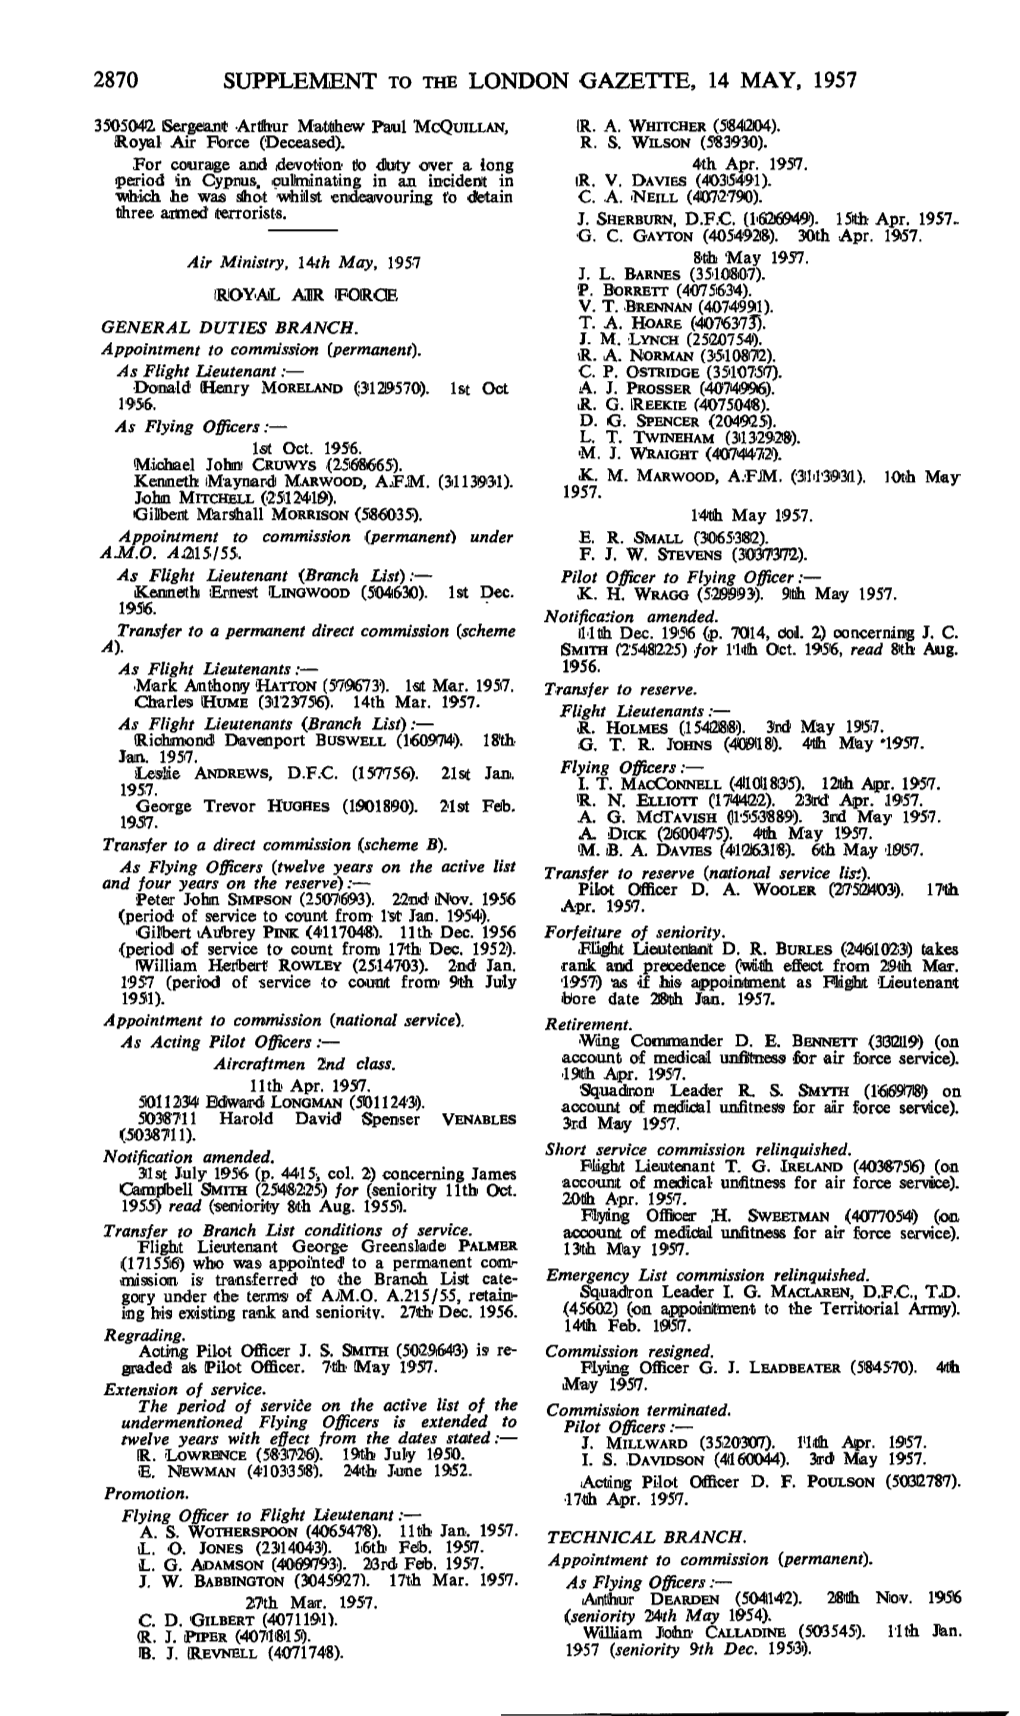 2870 Supplement to the London Gazette, 14 May, 1957